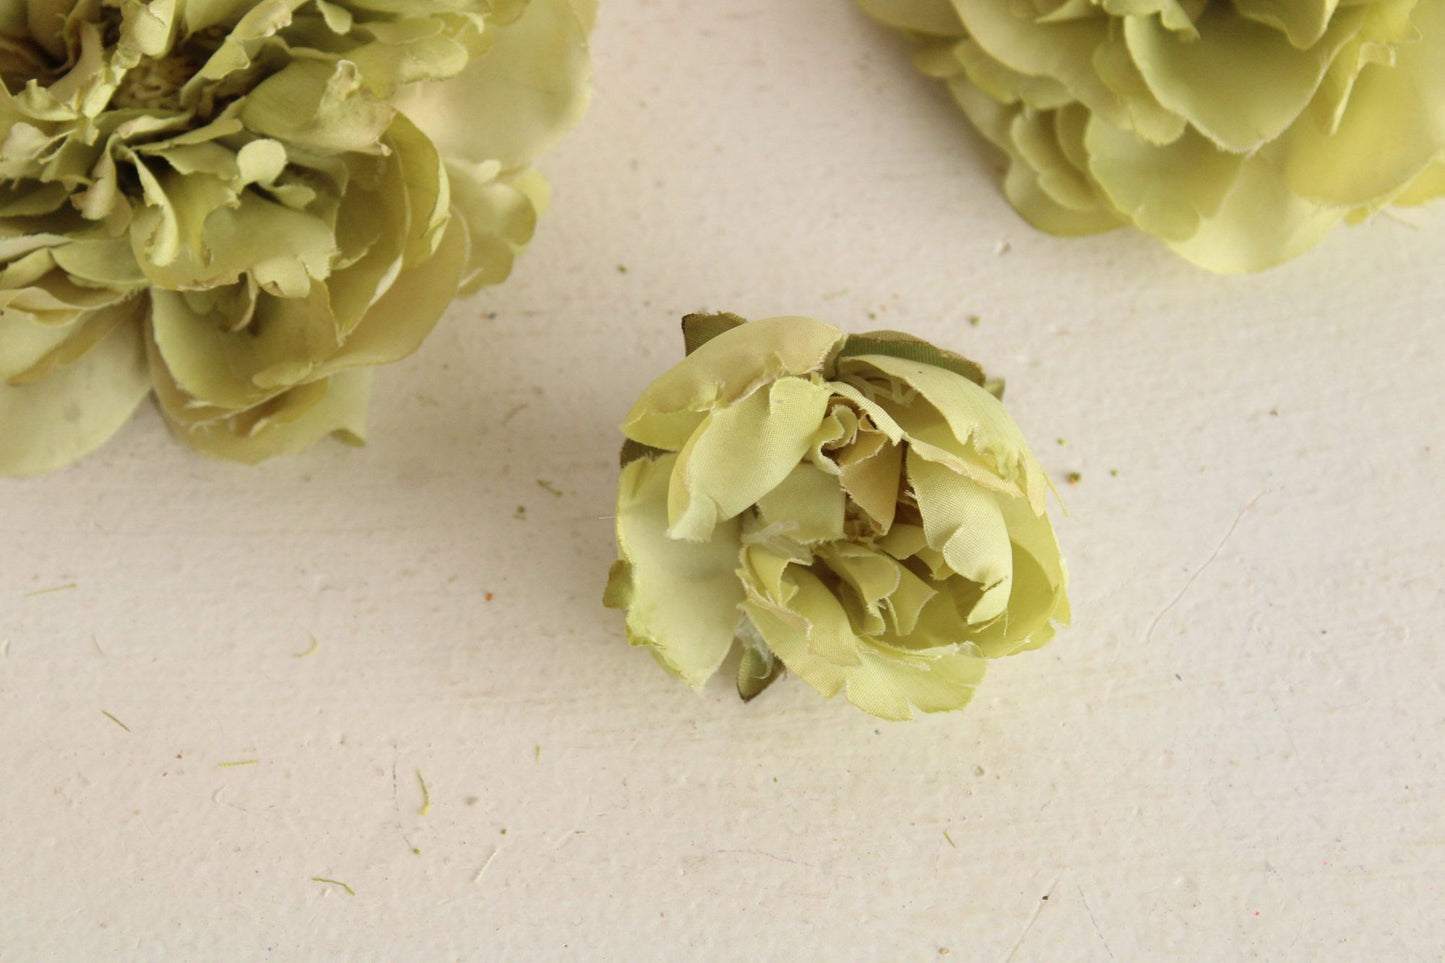 Lot of Silk Faux Flowers, Three Apple Green Florals, Millinery Crafting